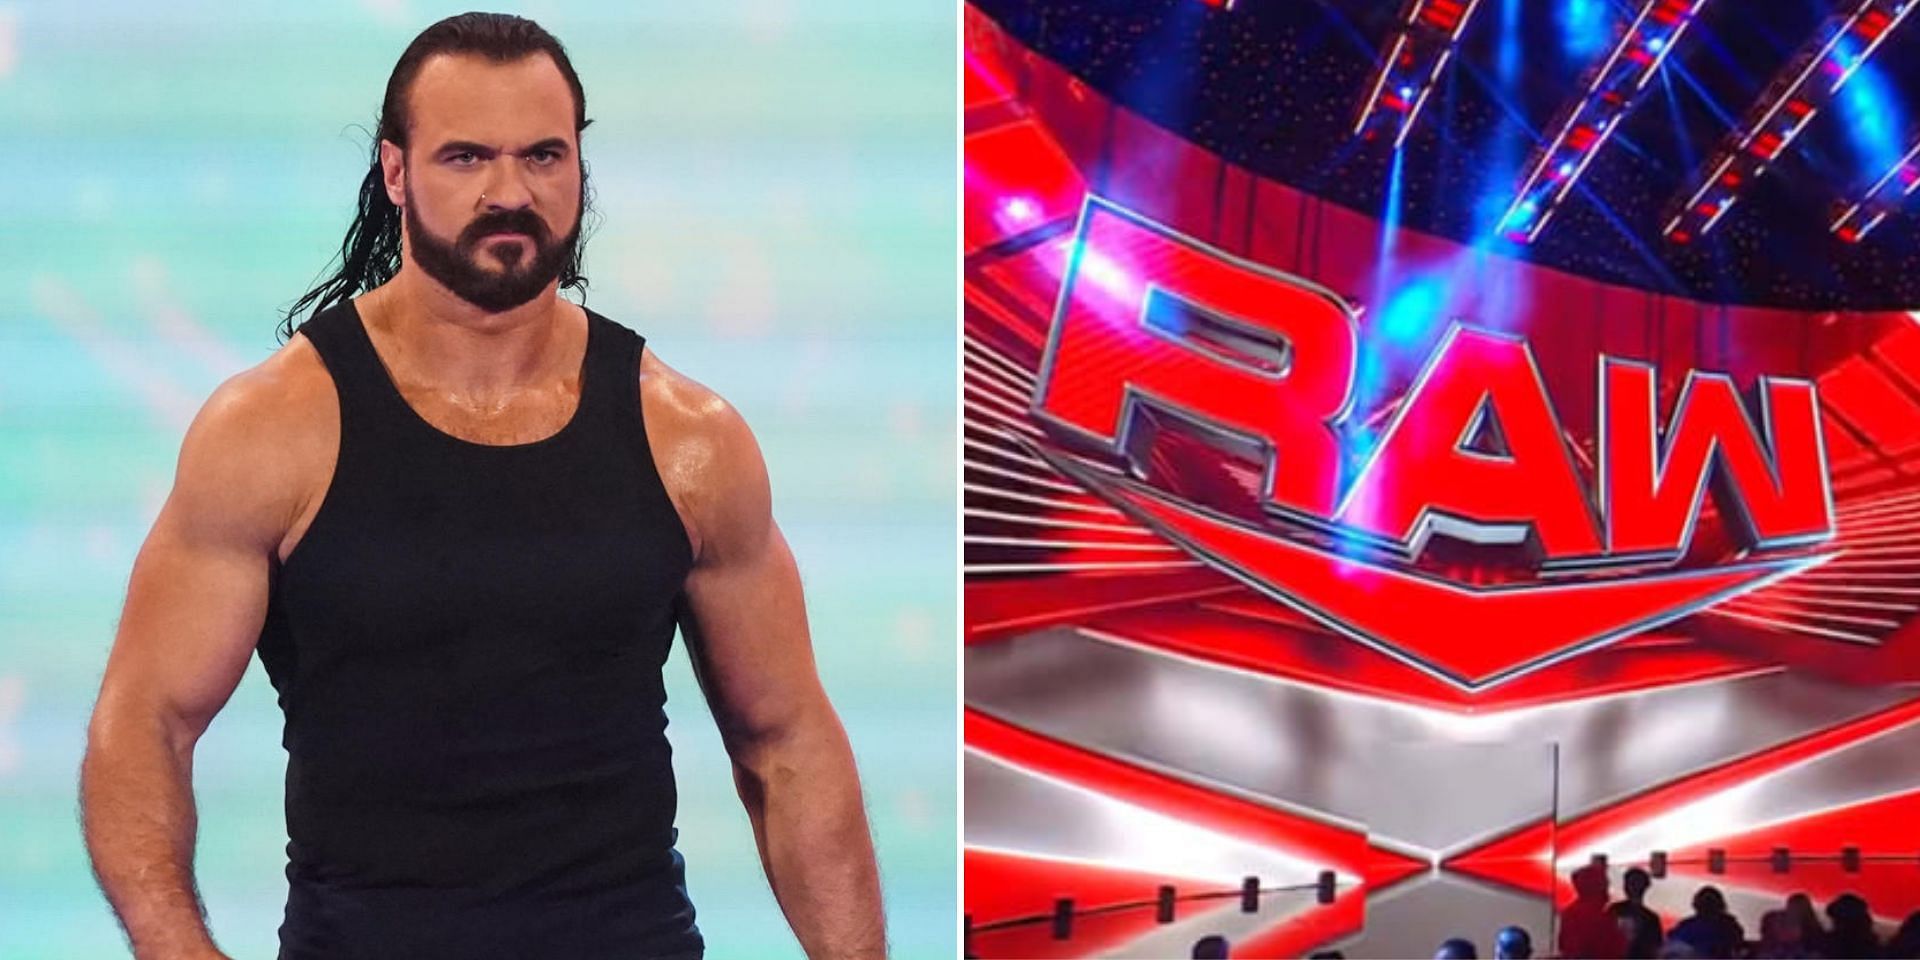 Drew McIntyre spoke about possibly wrestling this WWE star